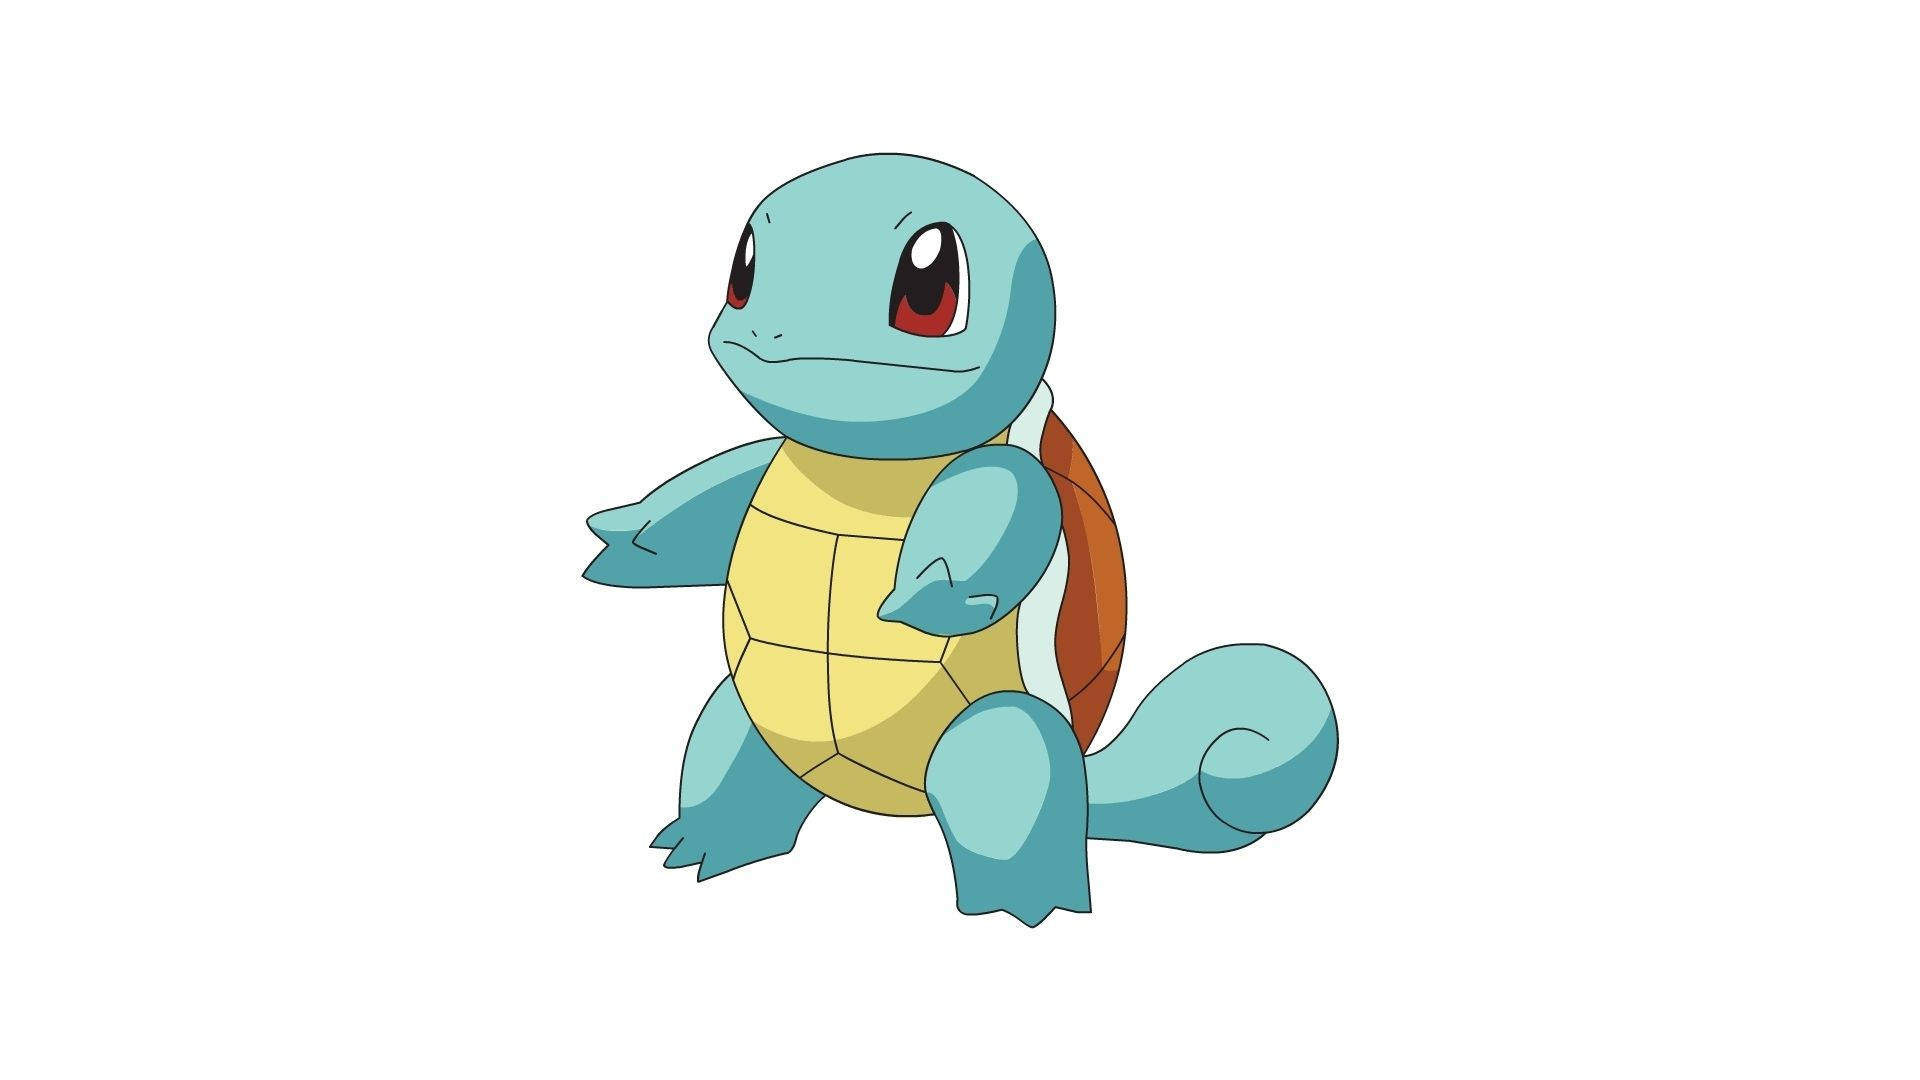 Free Squirtle Wallpaper Downloads, Squirtle Wallpaper for FREE